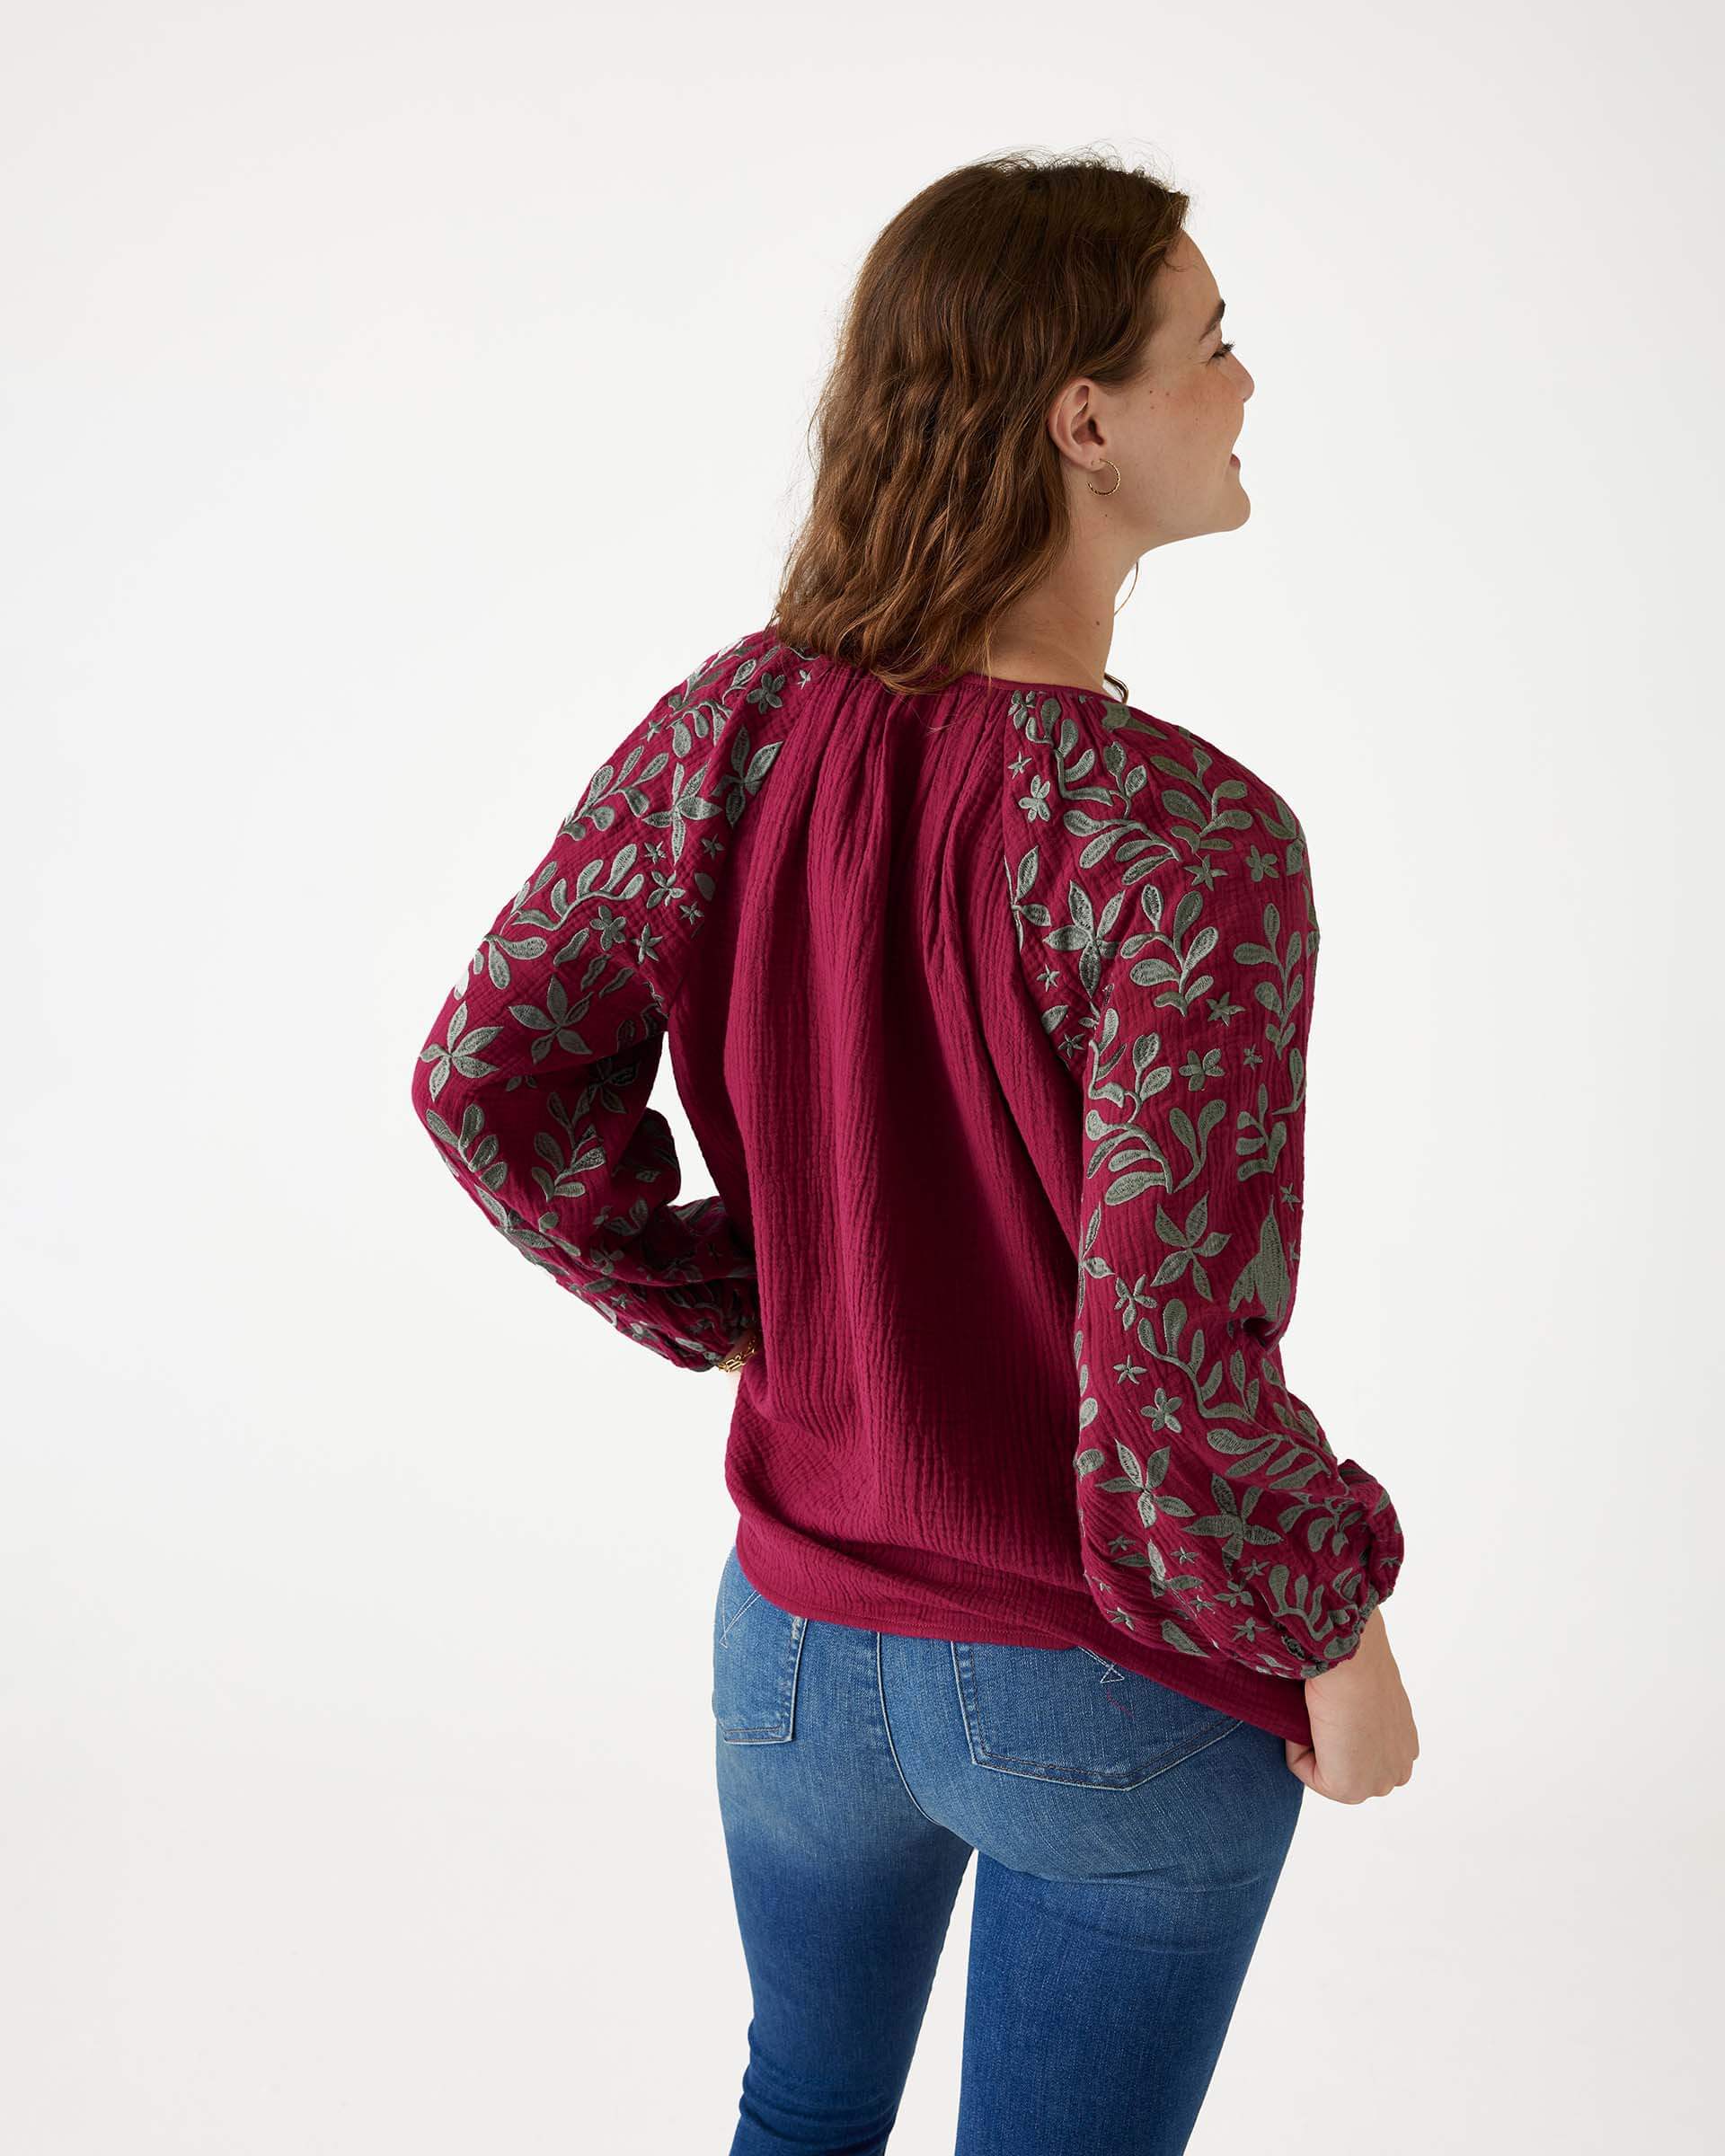 rearview of female wearing Mersea berry v-neckline blouse with embroidered sleeves and tassel ties standing on white background